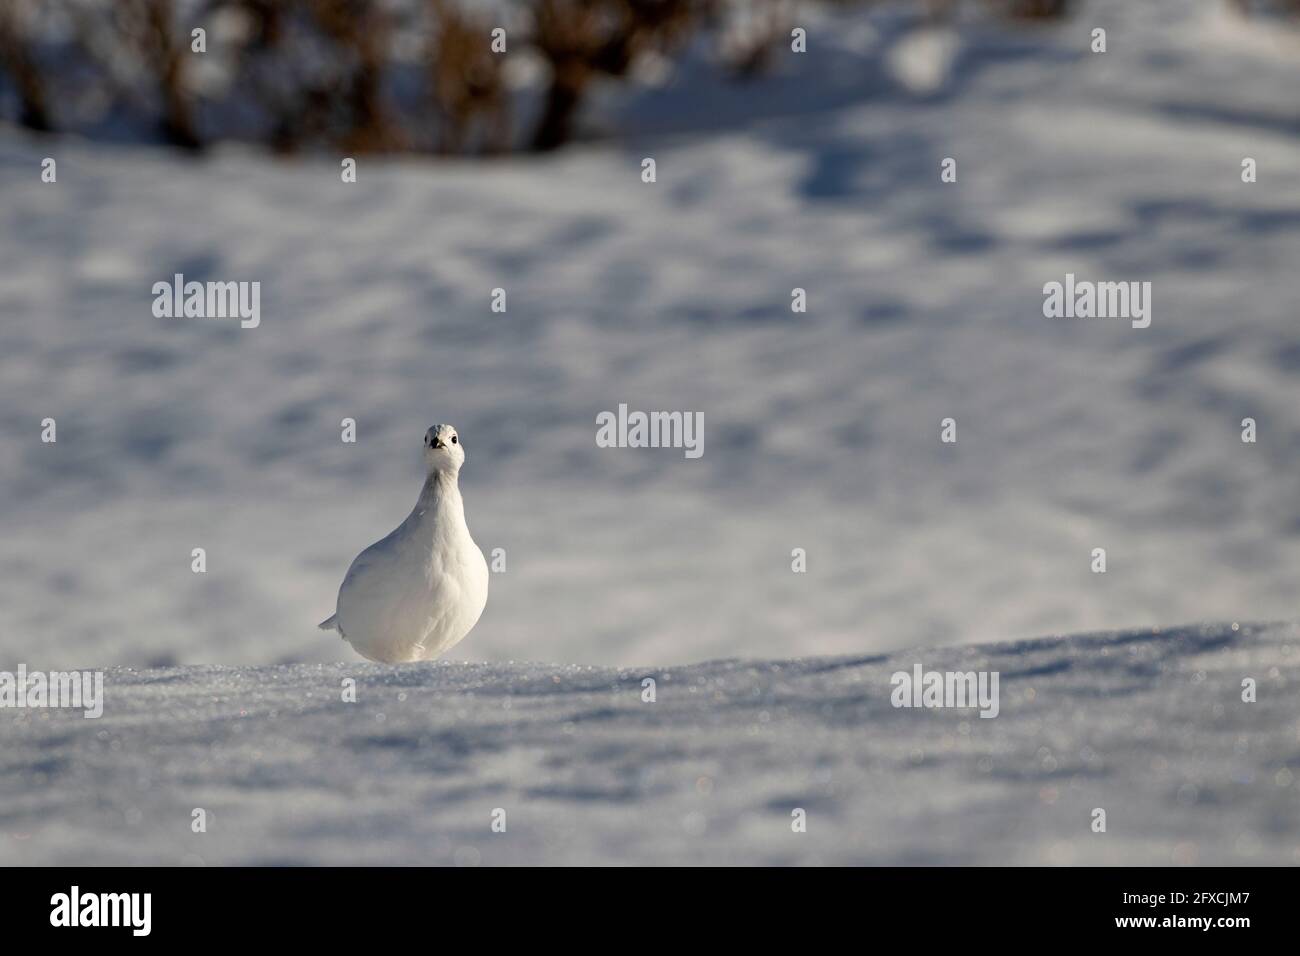 A willow ptarmigan in white winter plumage blends nicely against a snow-covered background. Stock Photo